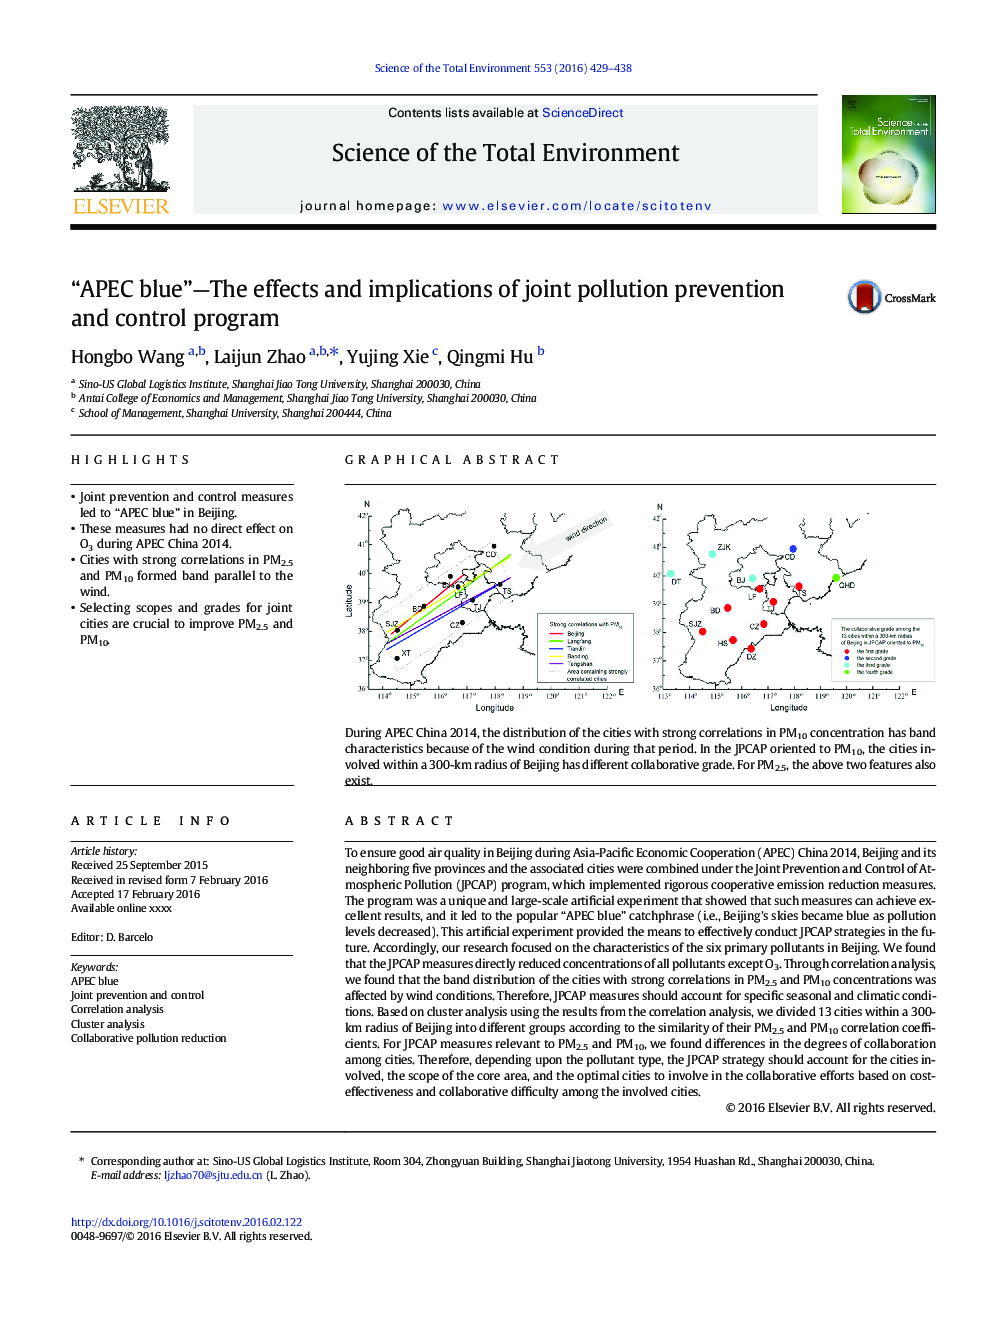 “APEC blue”-The effects and implications of joint pollution prevention and control program